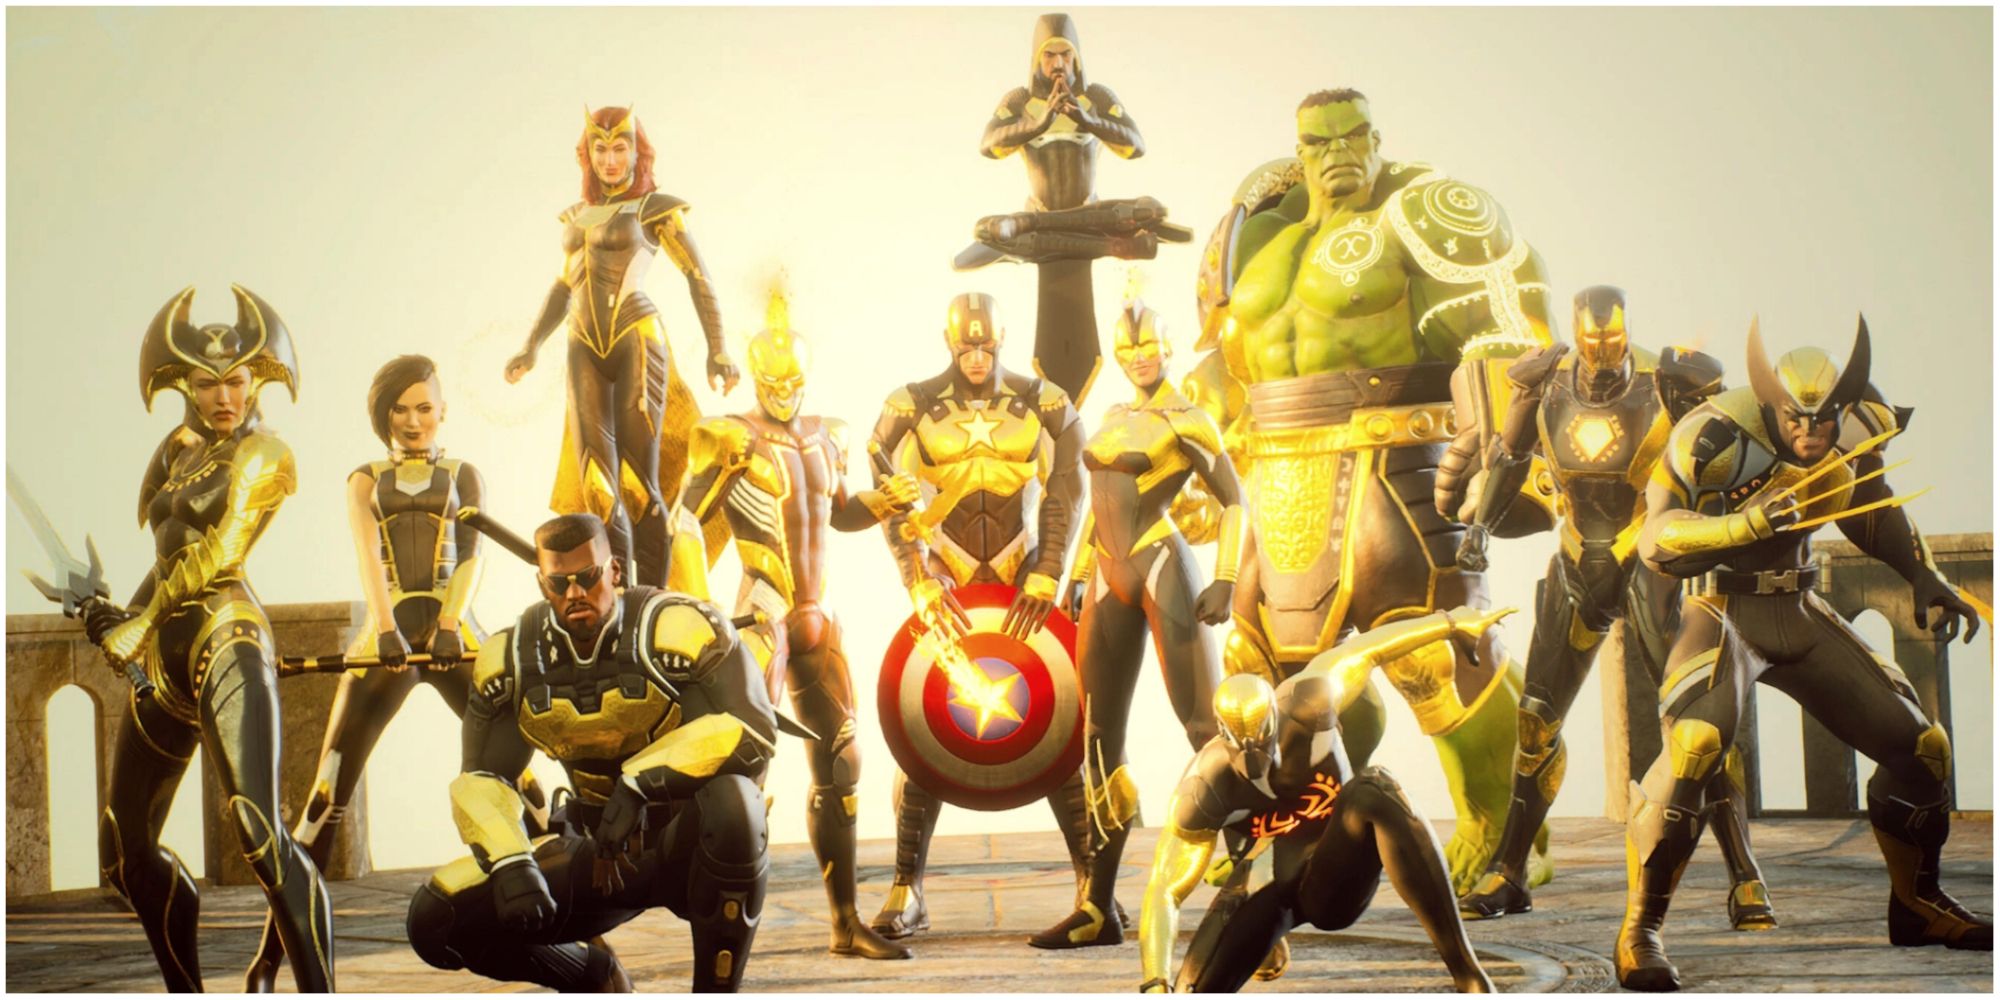 Marvel's Midnight Suns: Every Playable Character 